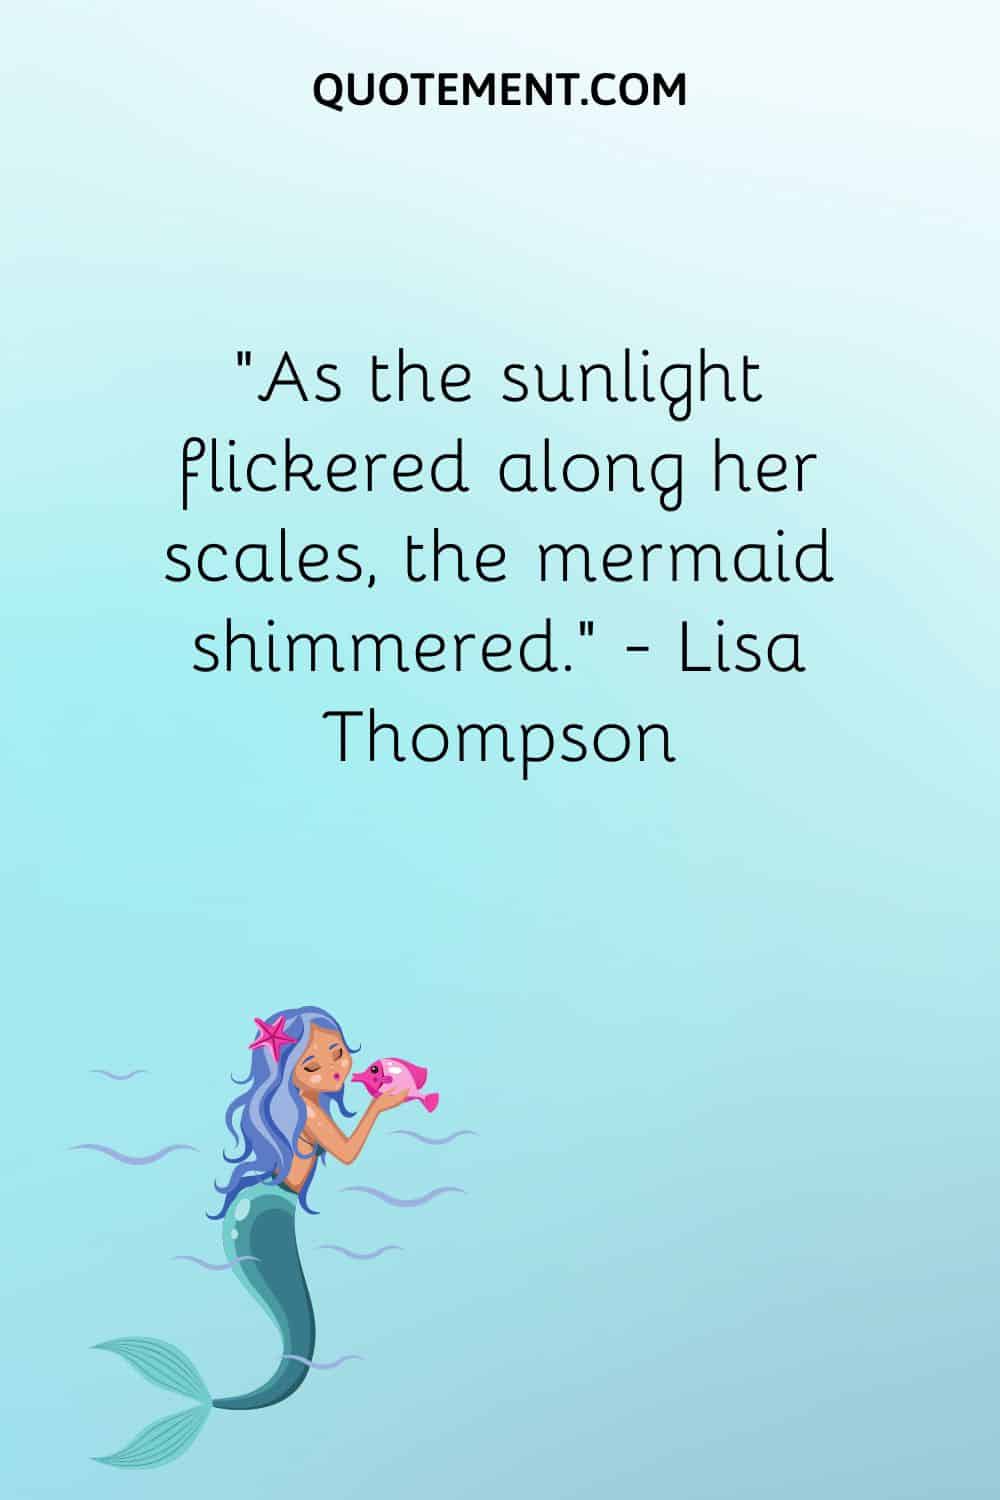 “As the sunlight flickered along her scales, the mermaid shimmered.” — Lisa Thompson